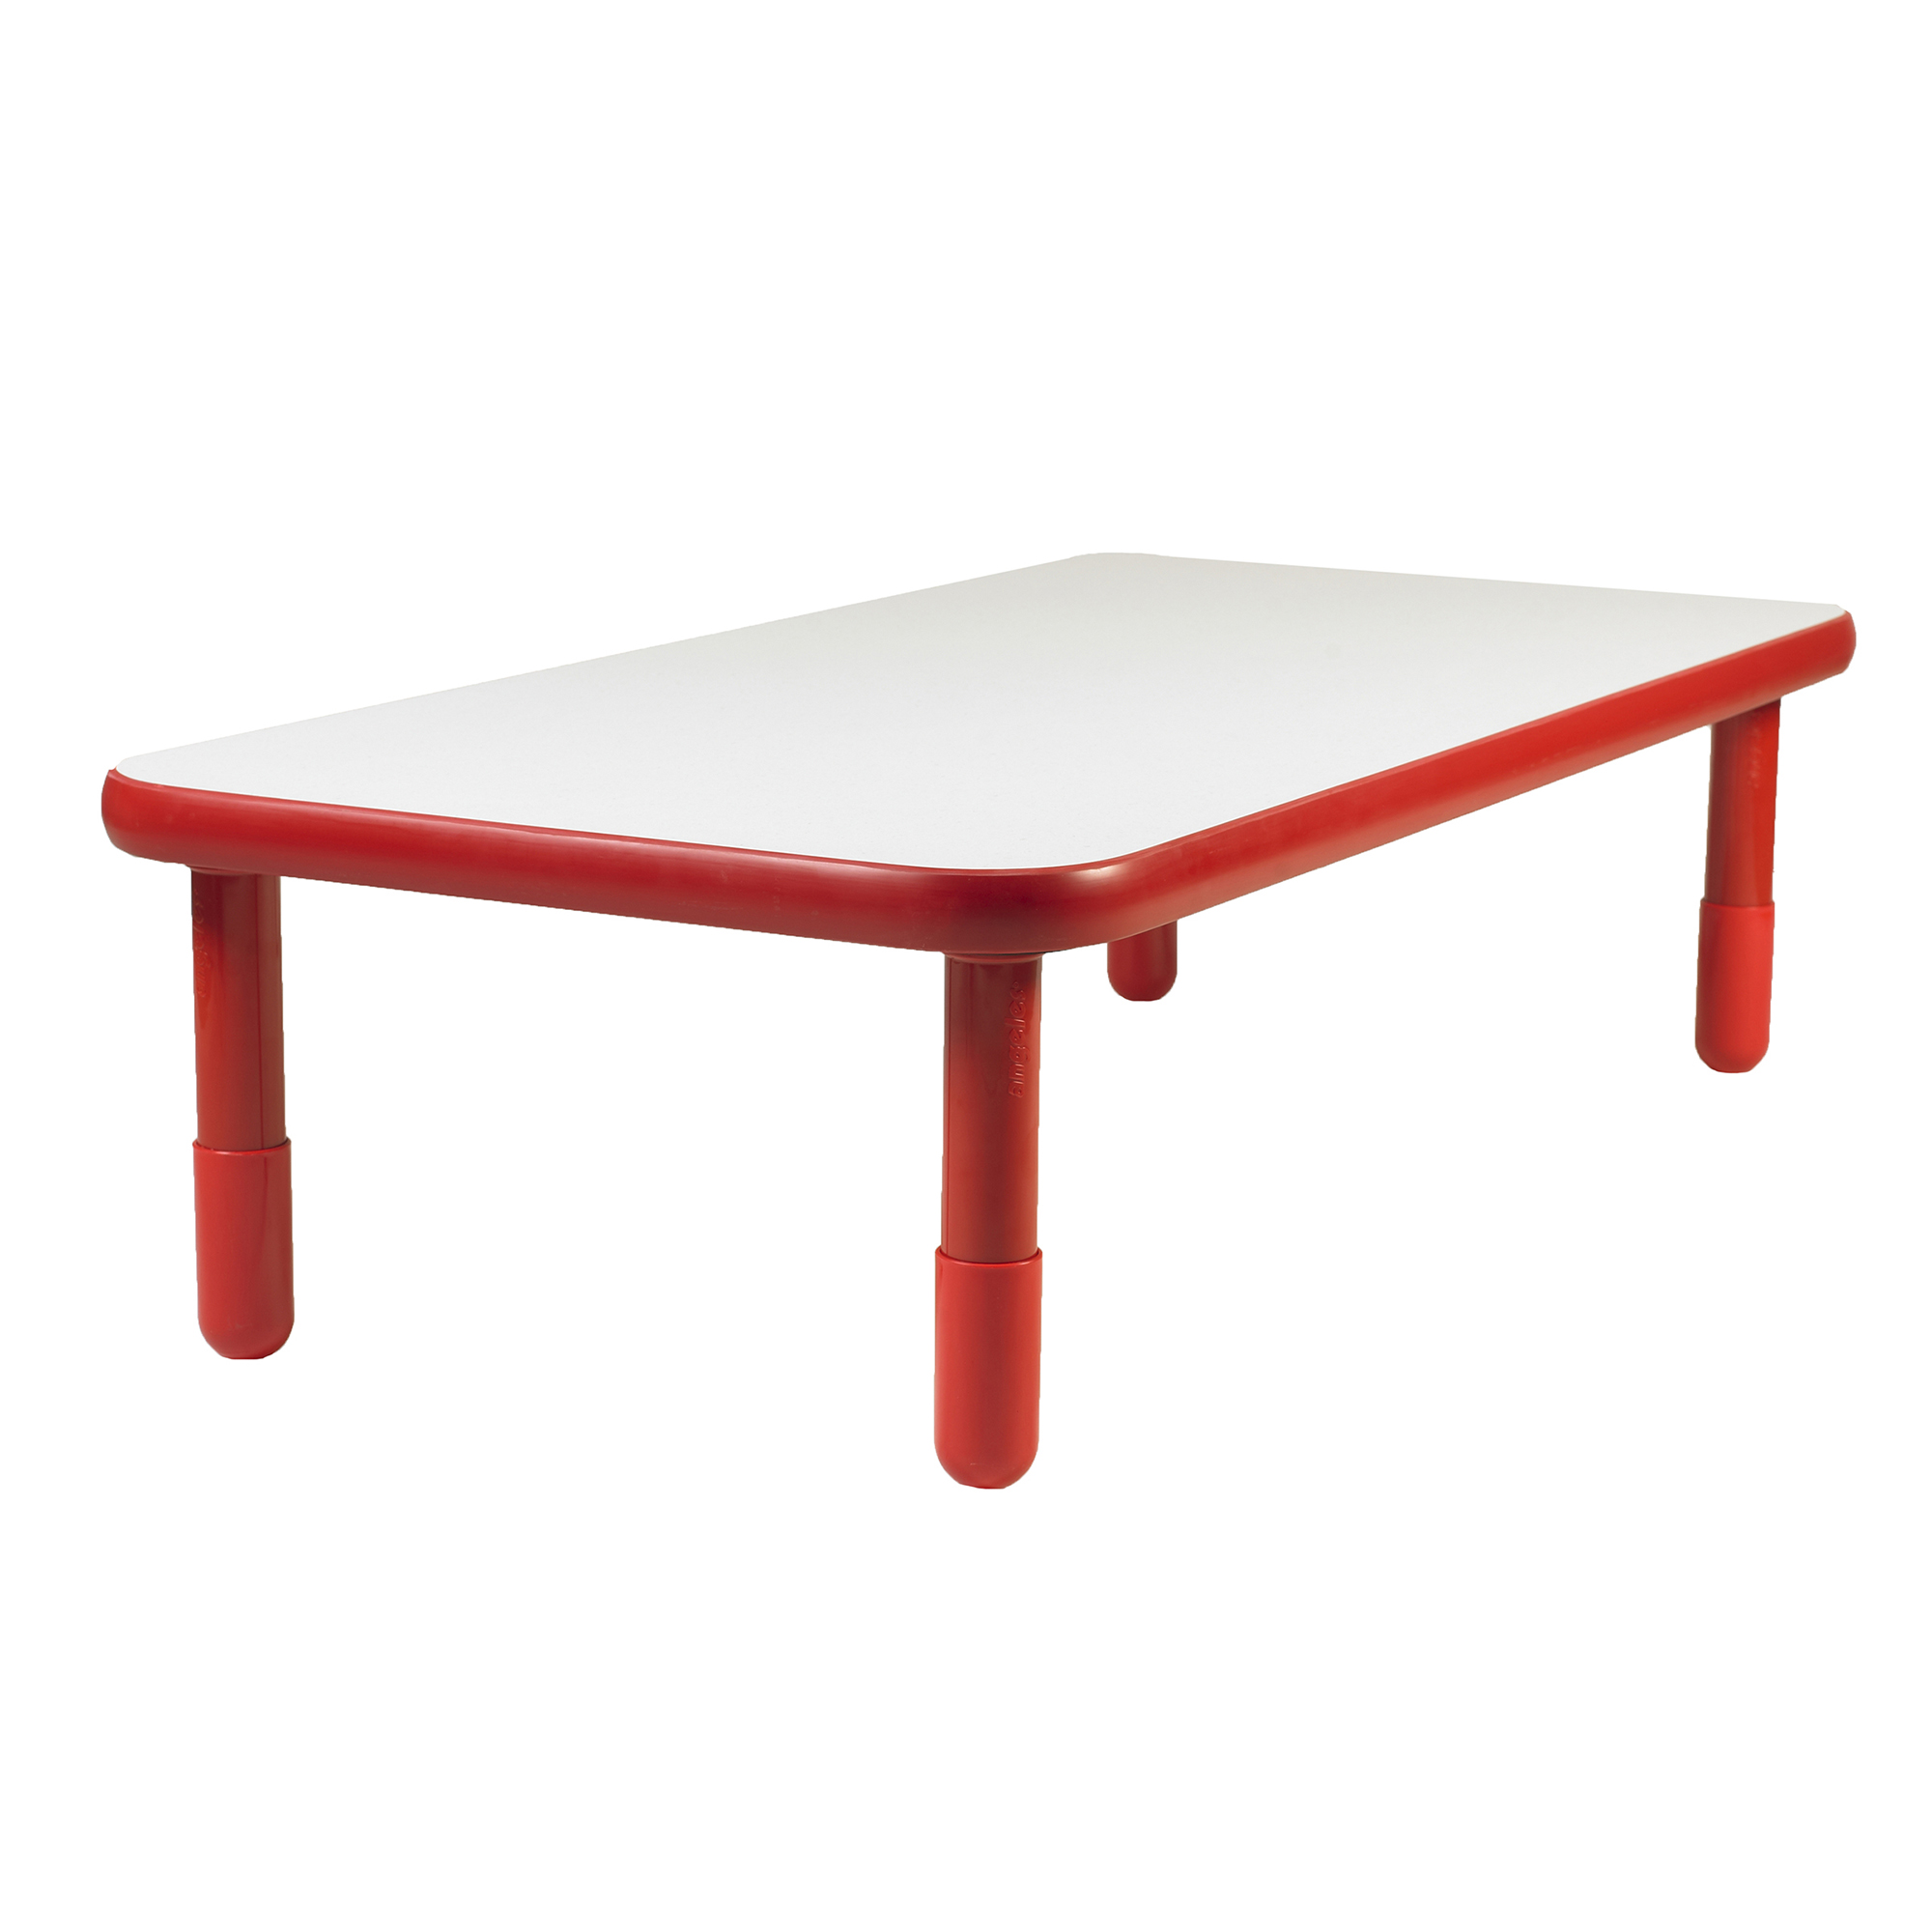 BaseLine® 152,5 cm  x 76 cm  Rectangular Table - Candy Apple Red with 40,5 cm  Legs